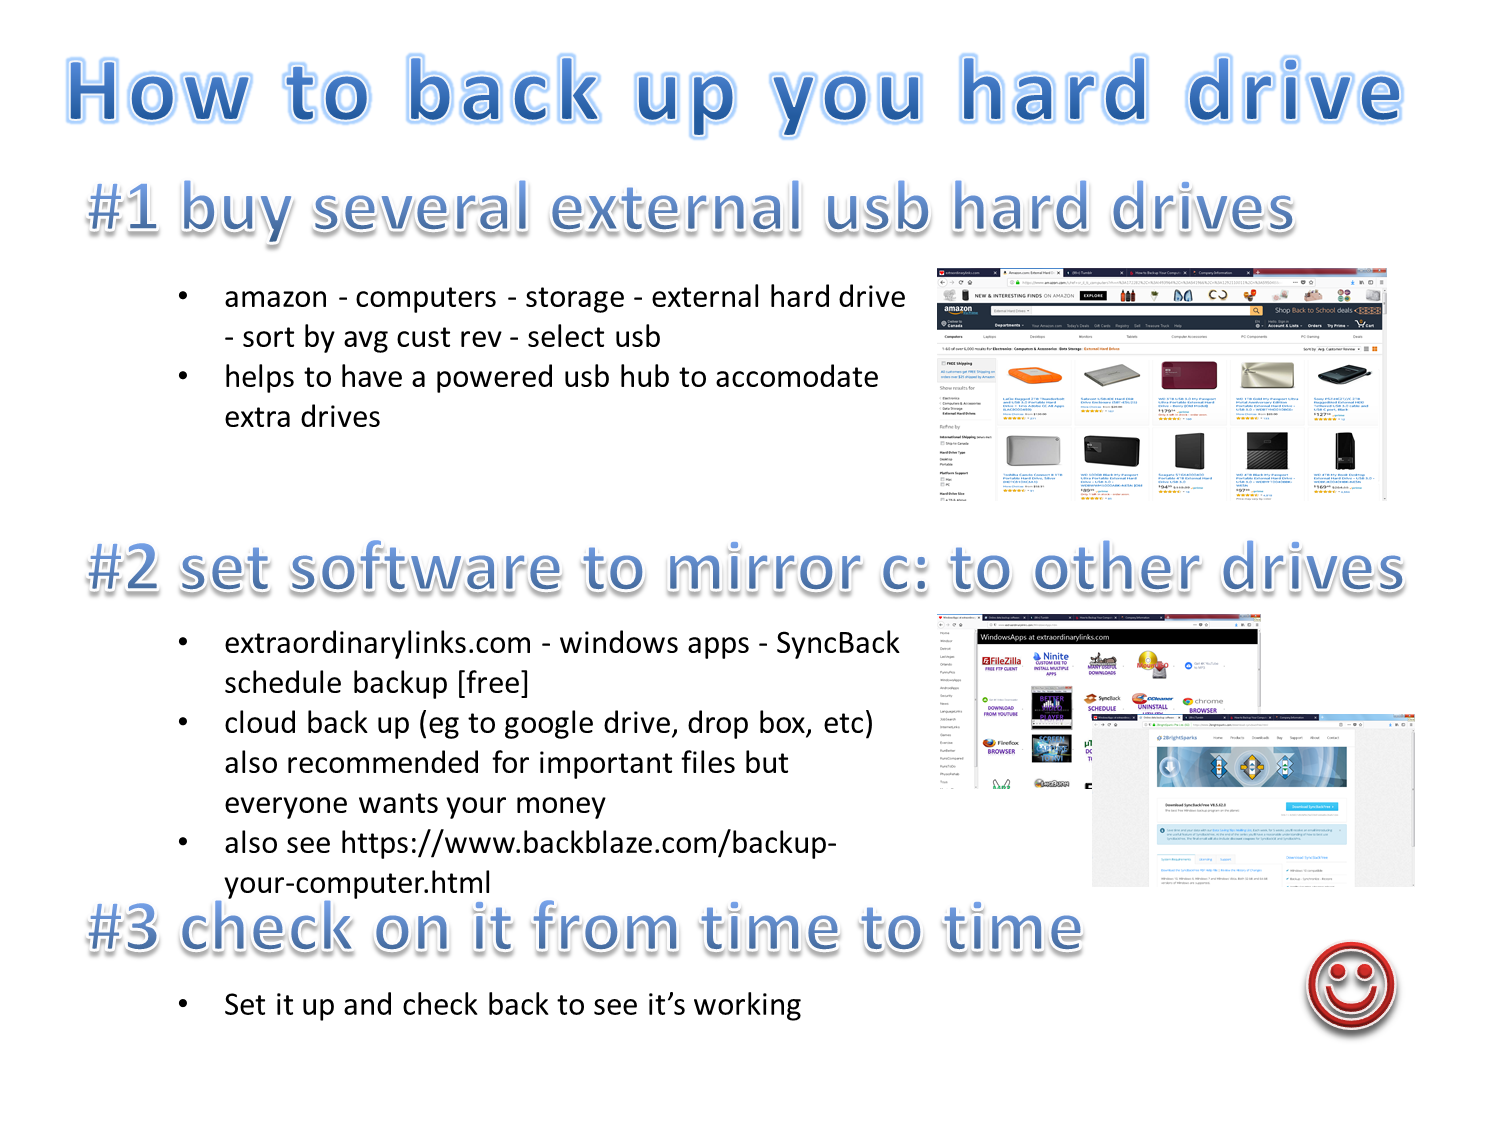 how to back up hard drive redundant arrary of independent disks external usb hd